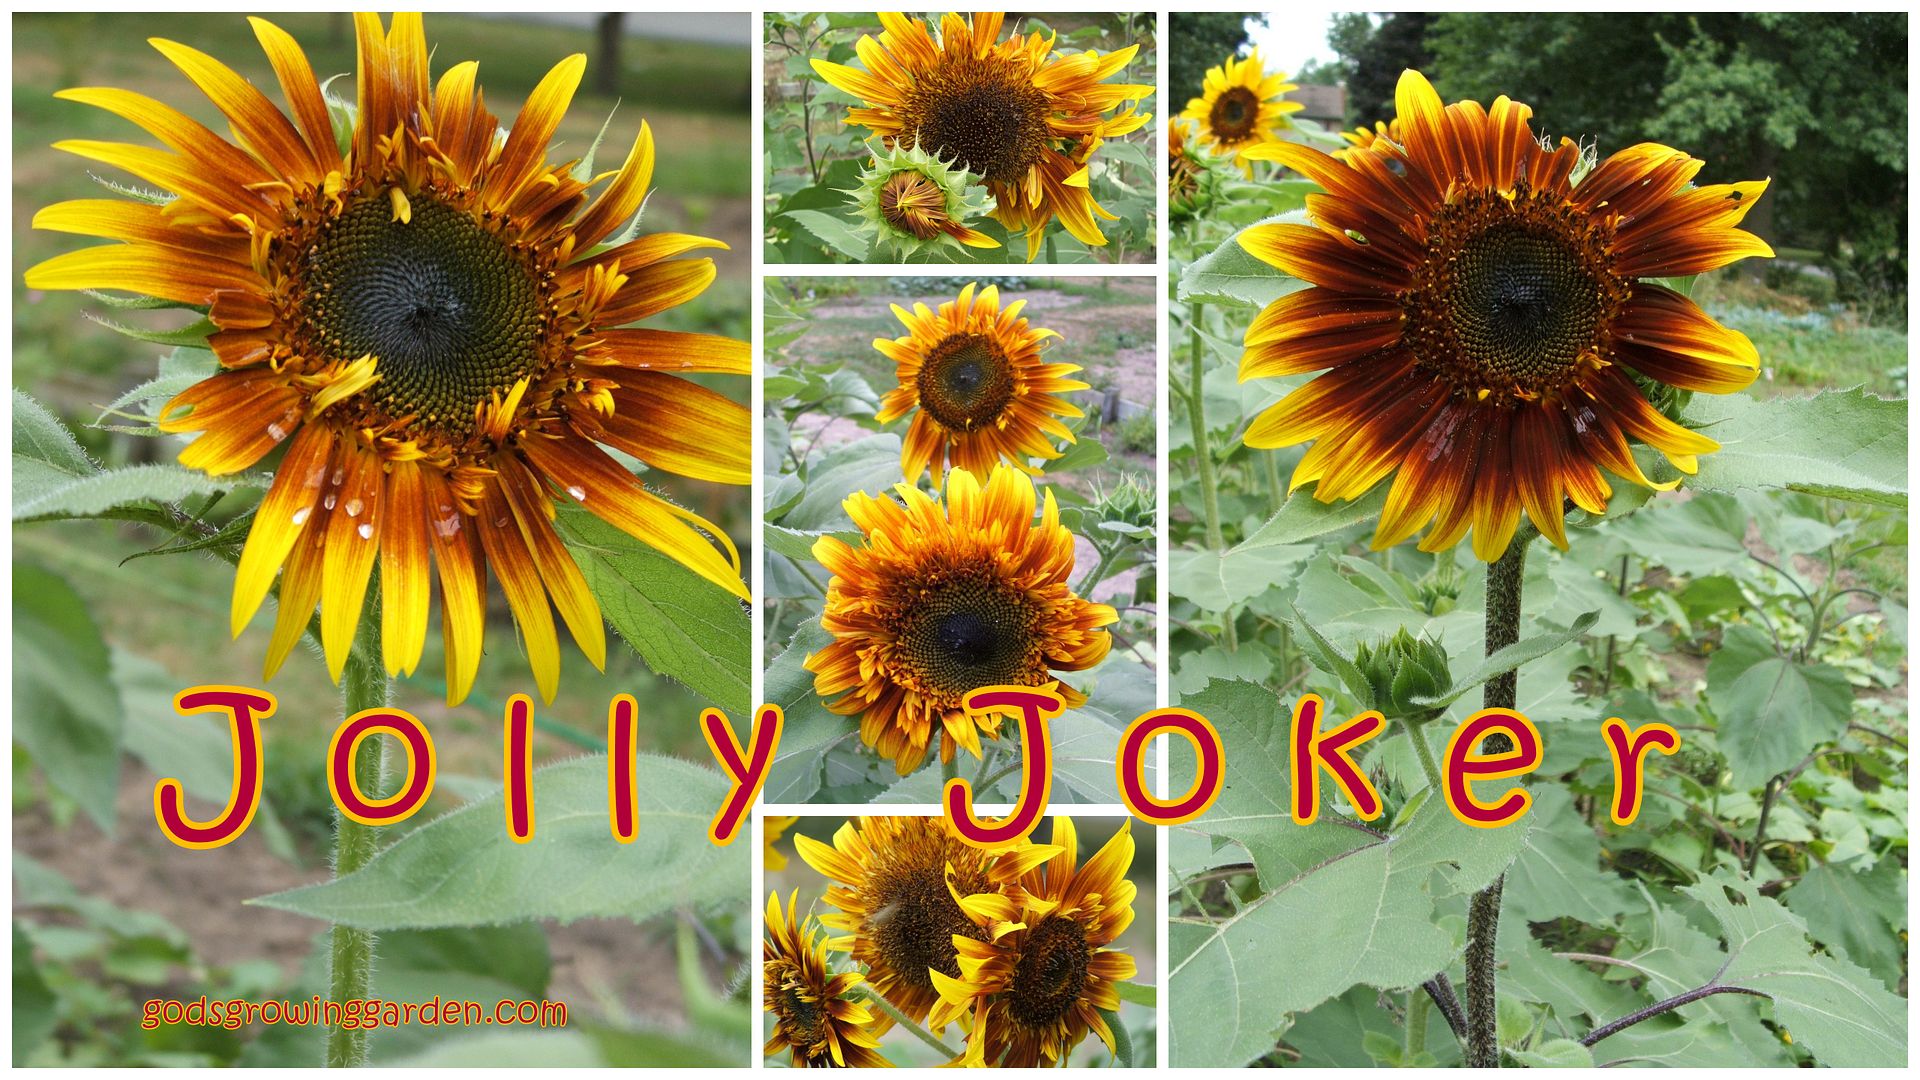 sunflowers by Angie Ouellette-Tower for godsgrowinggarden.com photo 2012-07-29_zps93a5c1d2.jpg